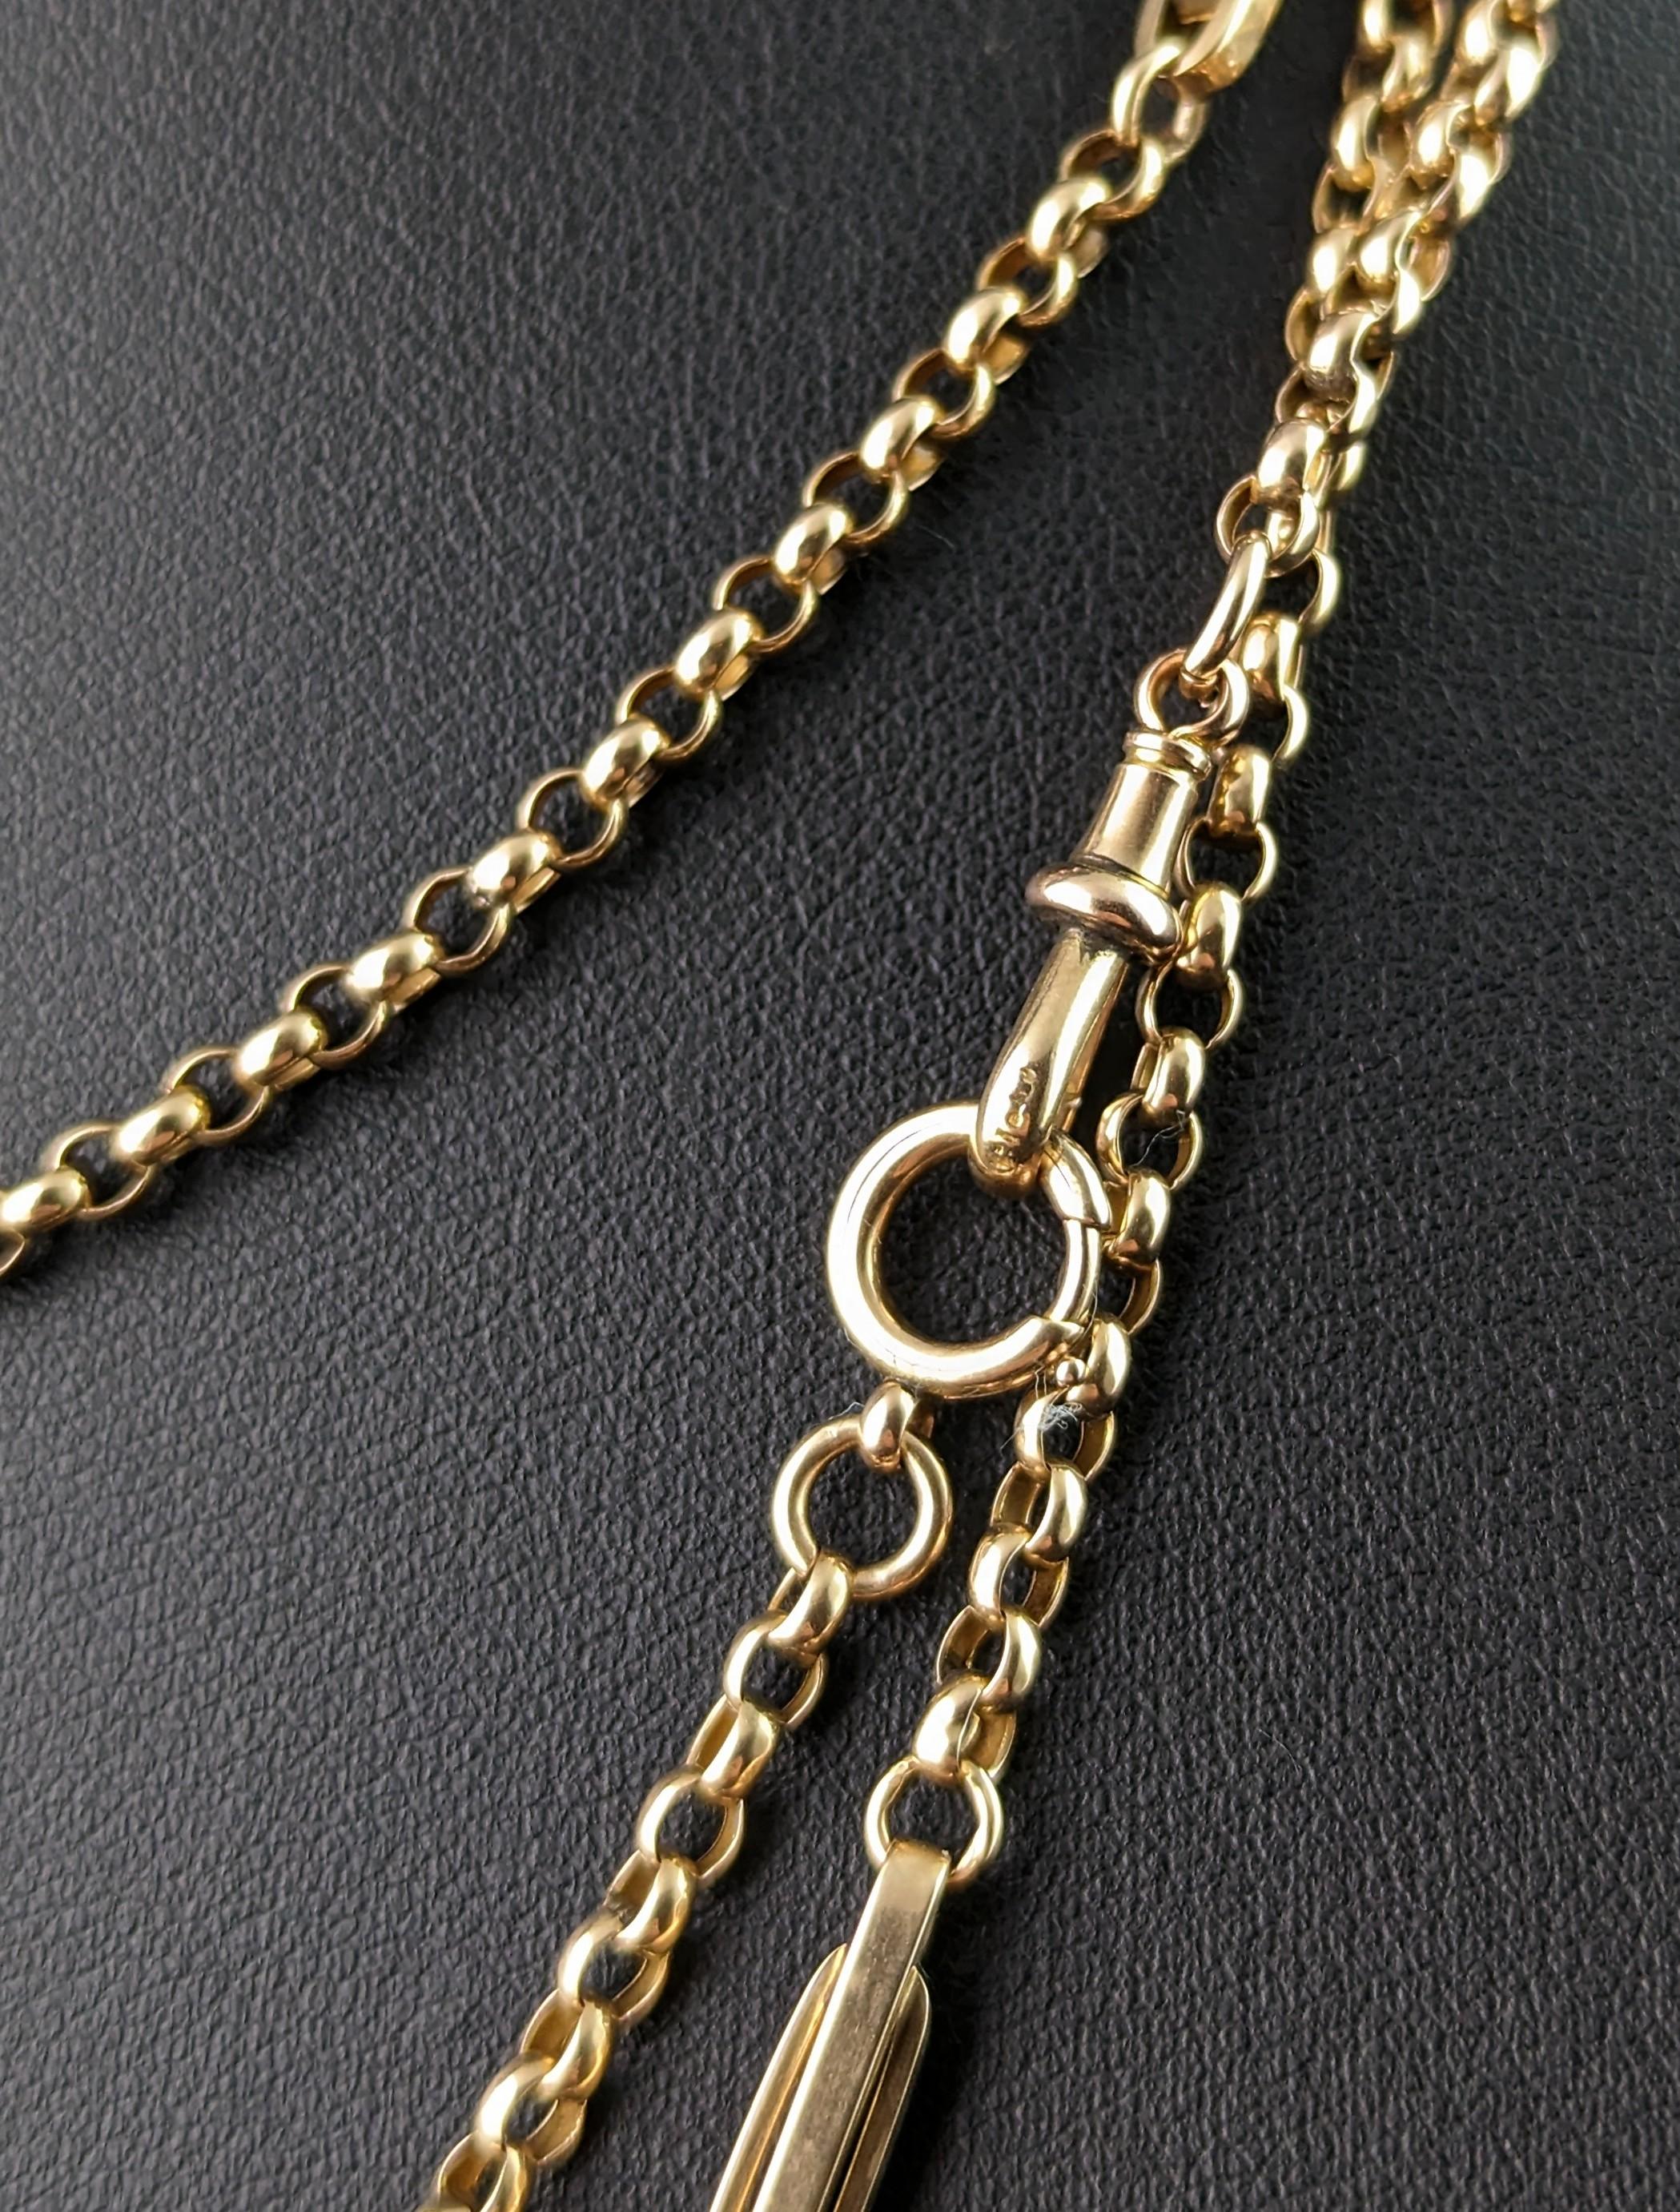 Antique 9 Kt Yellow Gold Fancy Link Long Chain Necklace, Guard Chain, Victorian  For Sale 2